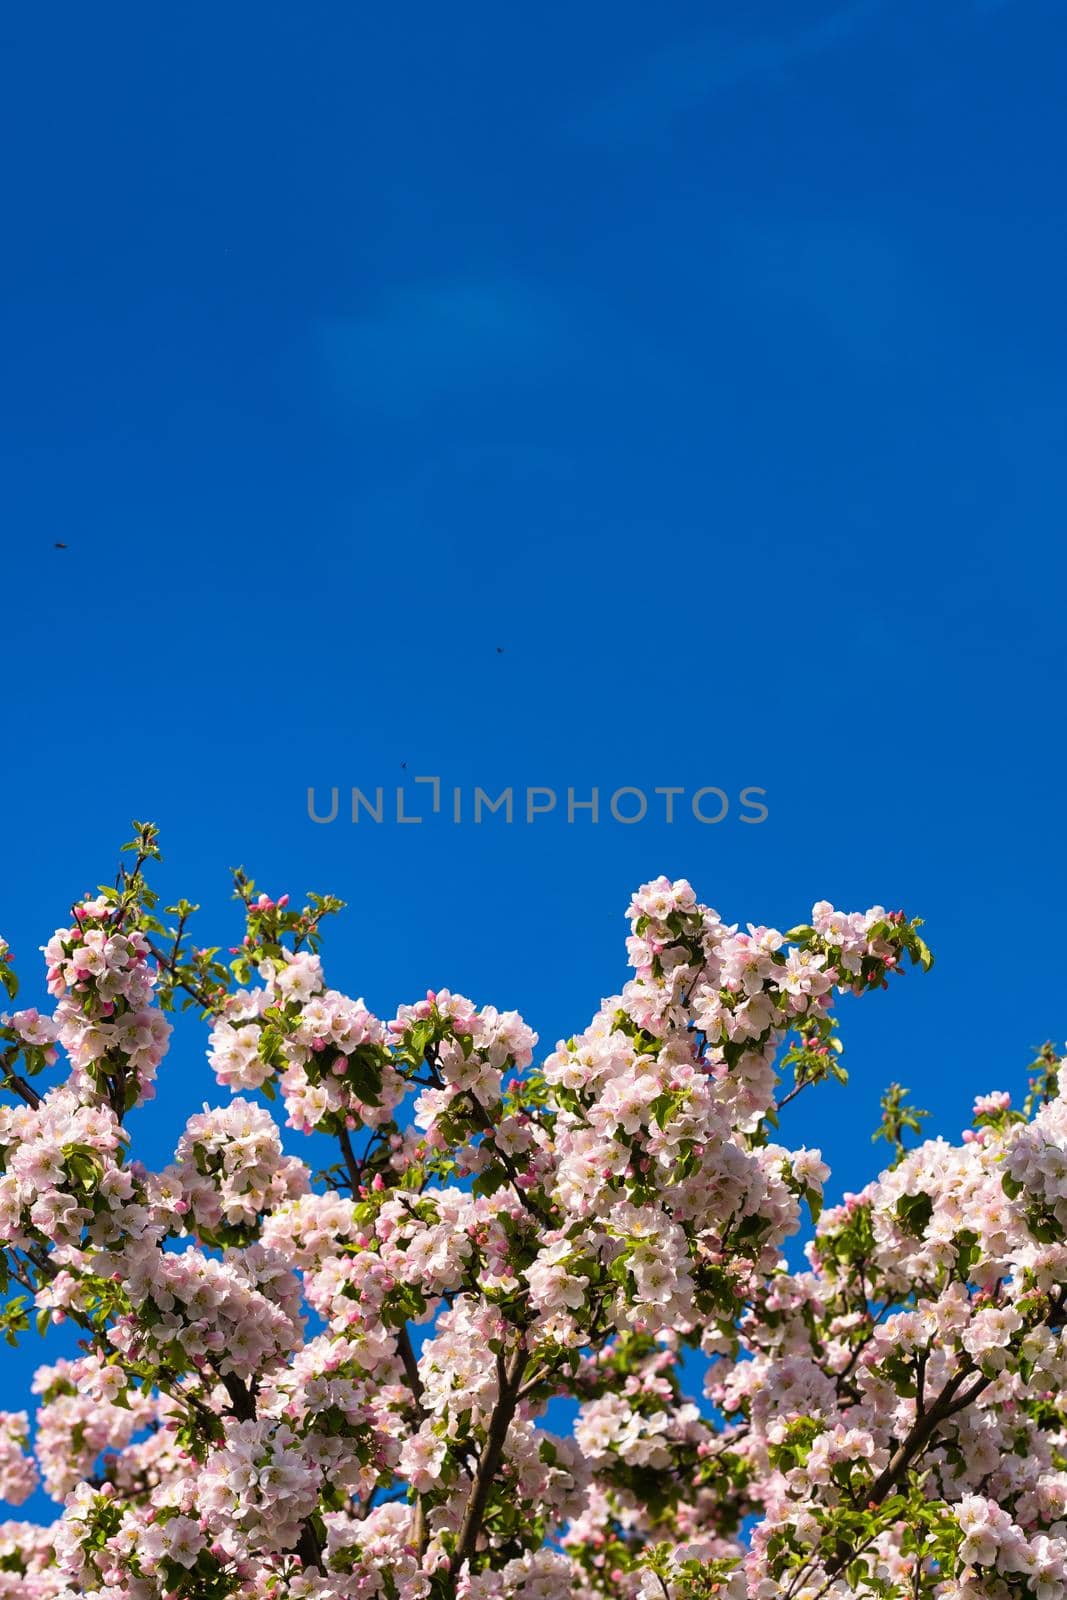 Background of apple tree branches with pink flowers on a blue sky background.